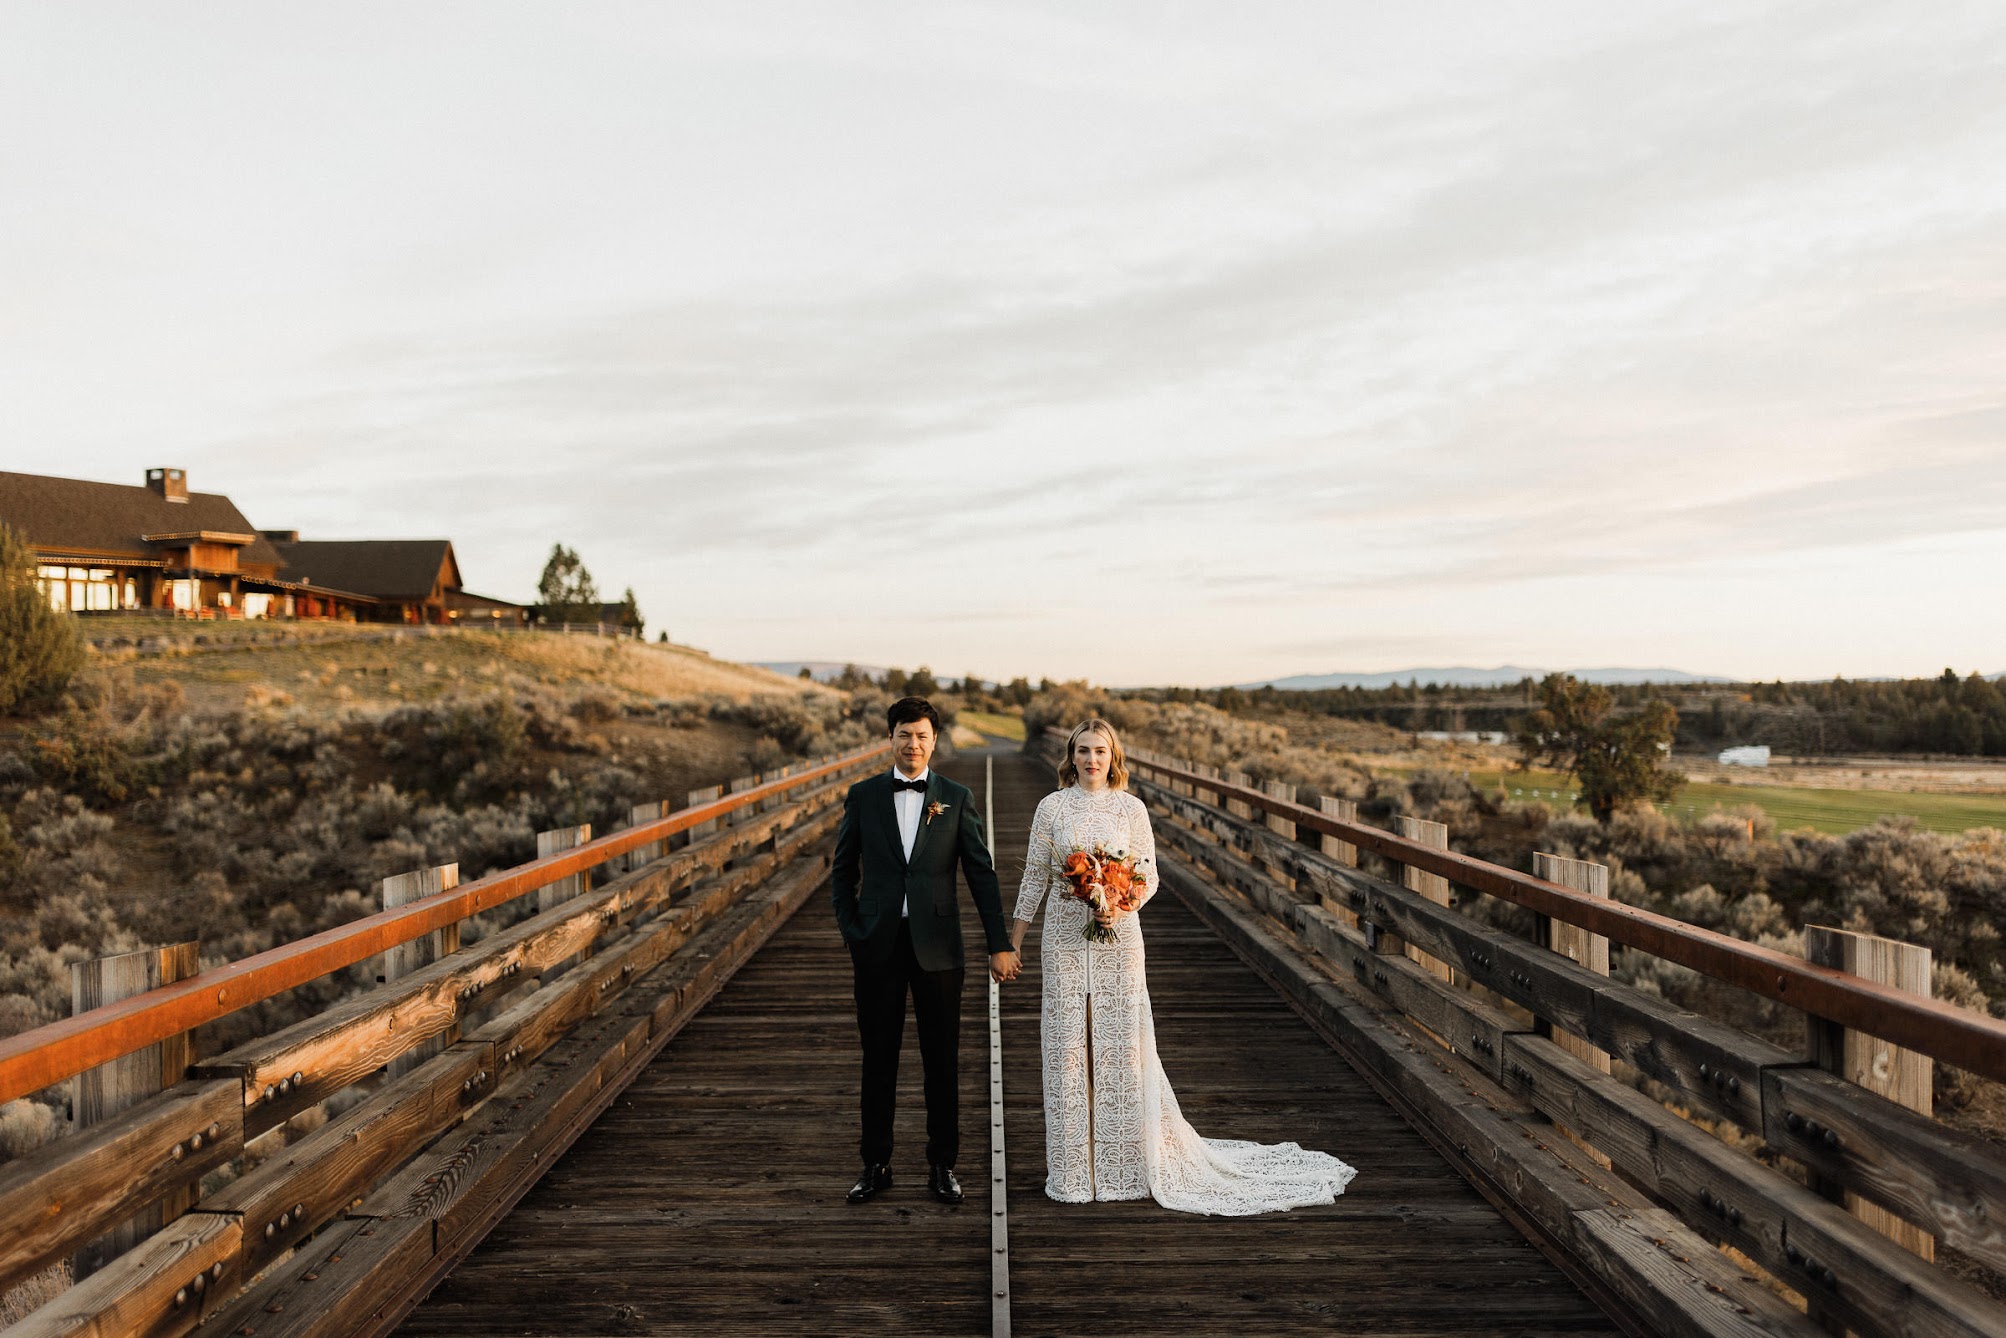 The bride and groom standing on a long wooden bridge holding hands with a serious faces on